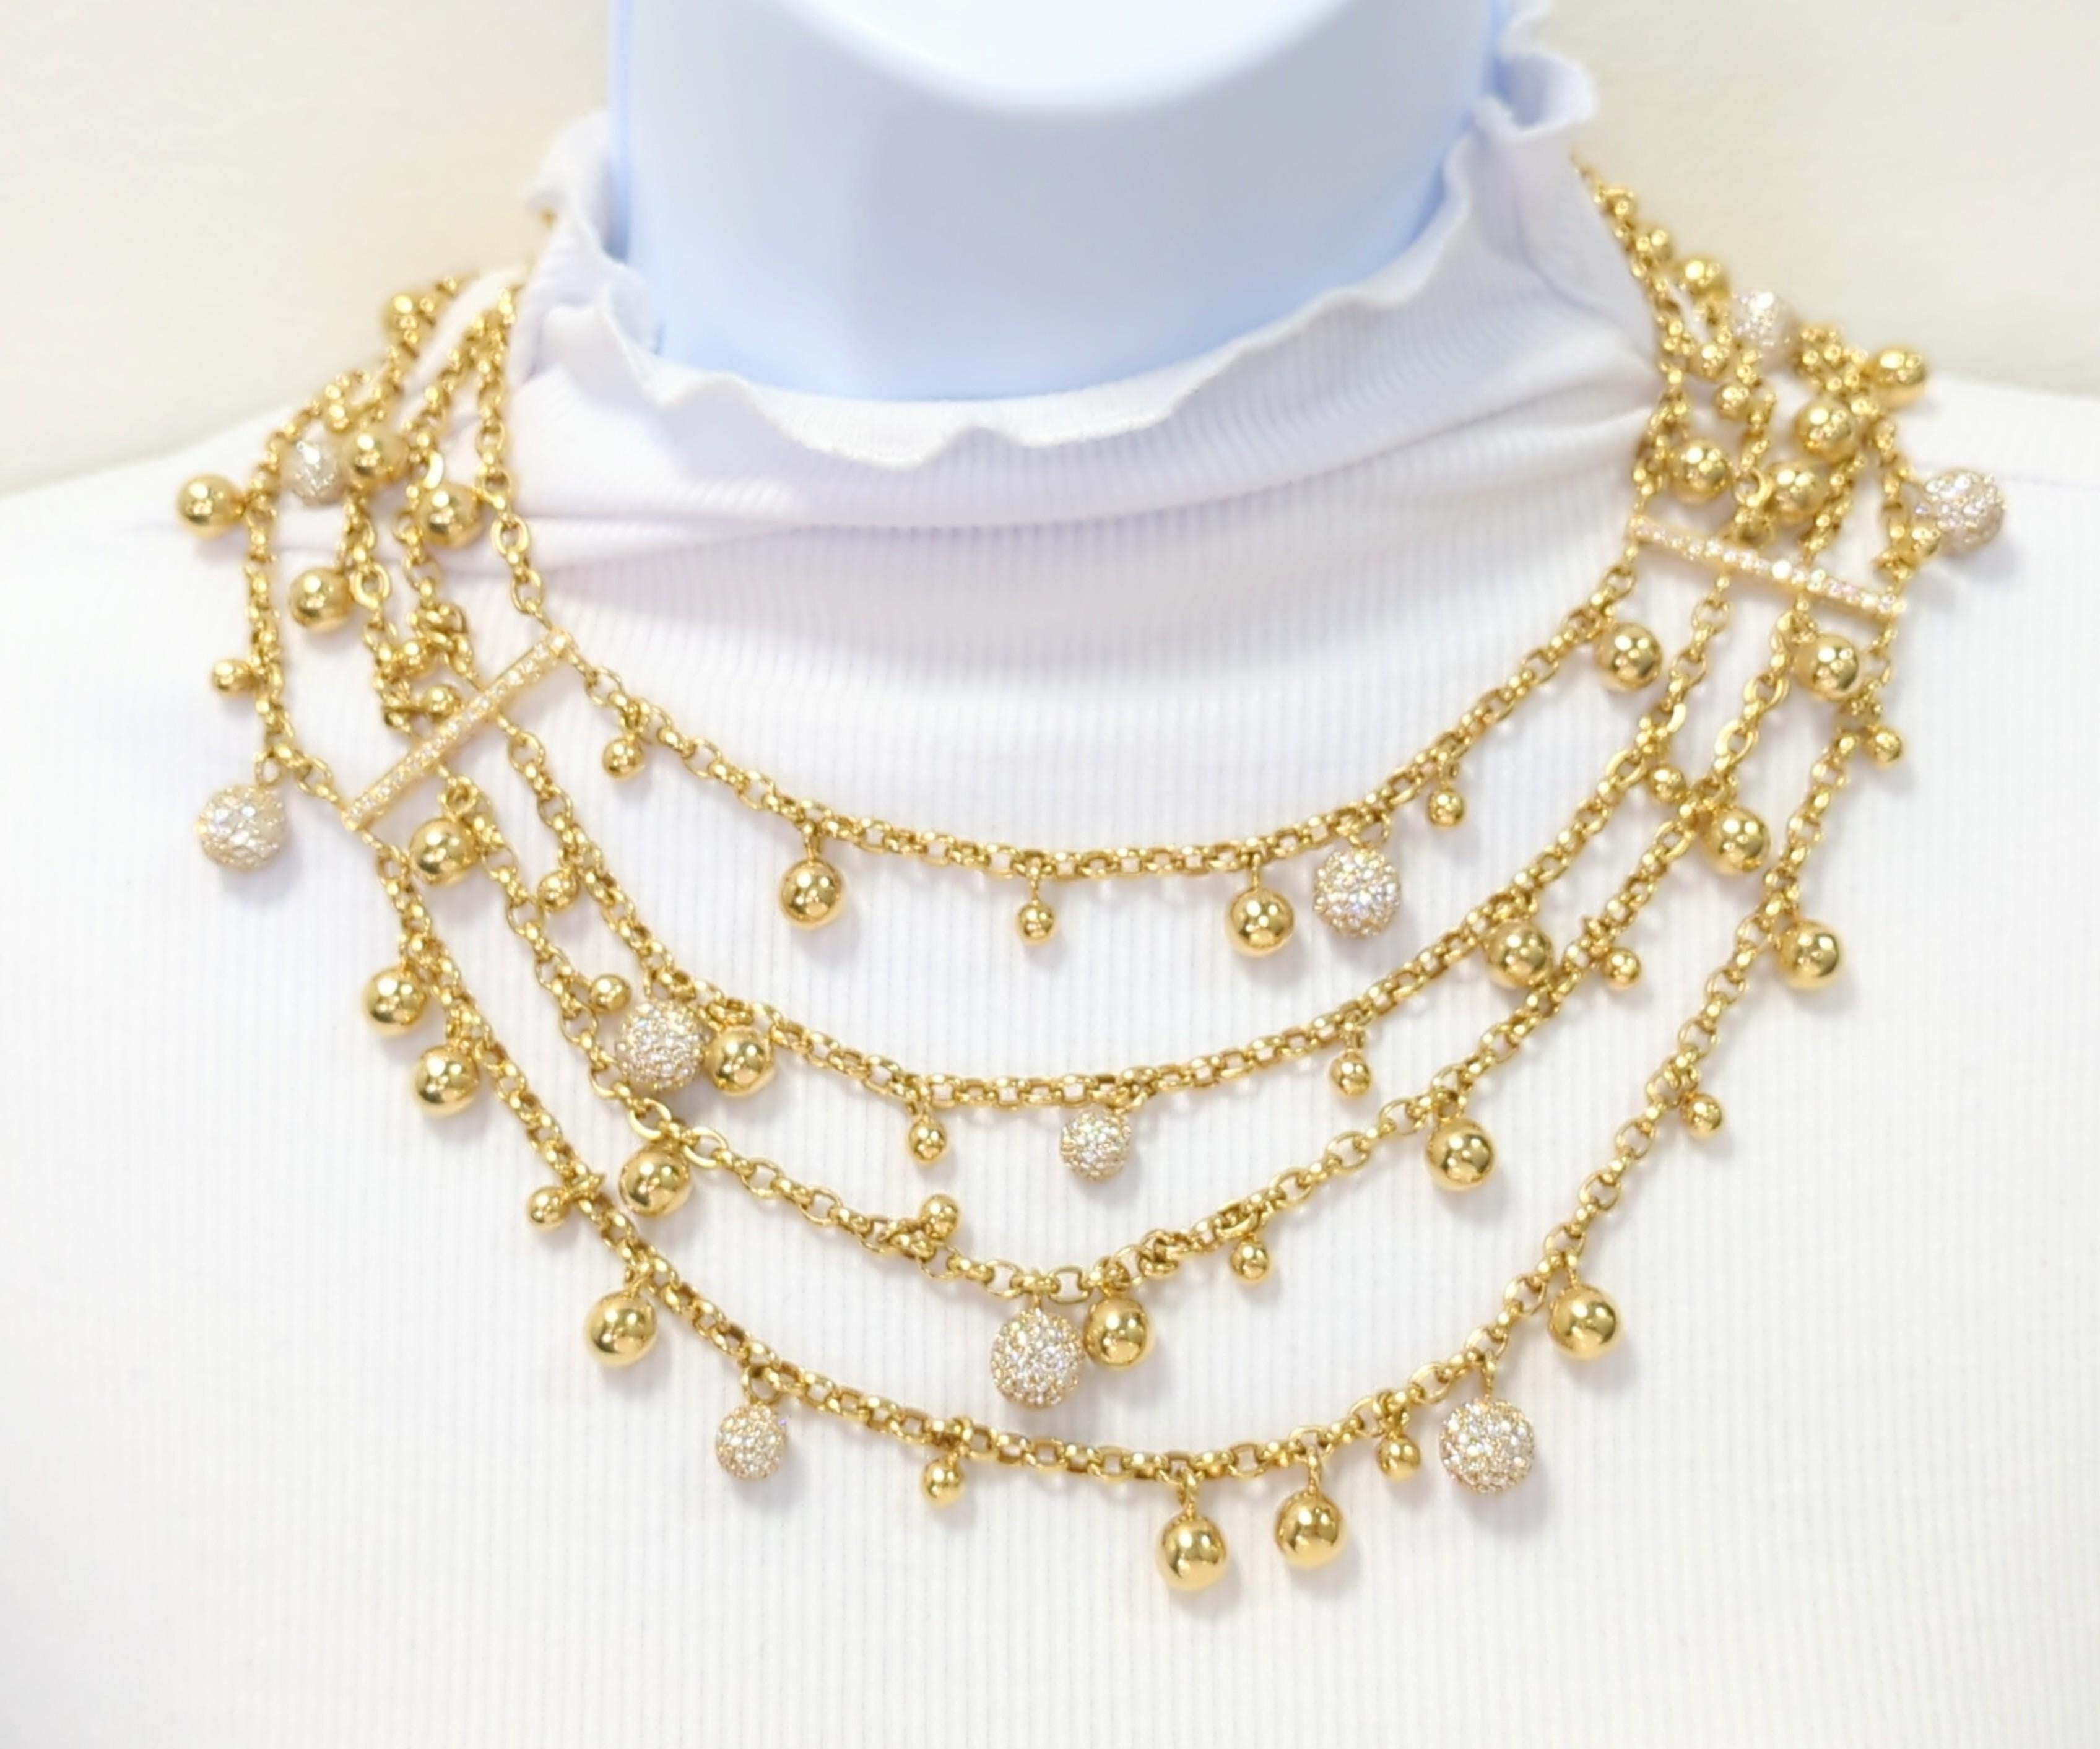 Gorgeous estate Tallarico chunky necklace and bracelet with pave white diamond round balls, big chain, some pearls. and a great big look!  Handmade in 18k yellow gold.  